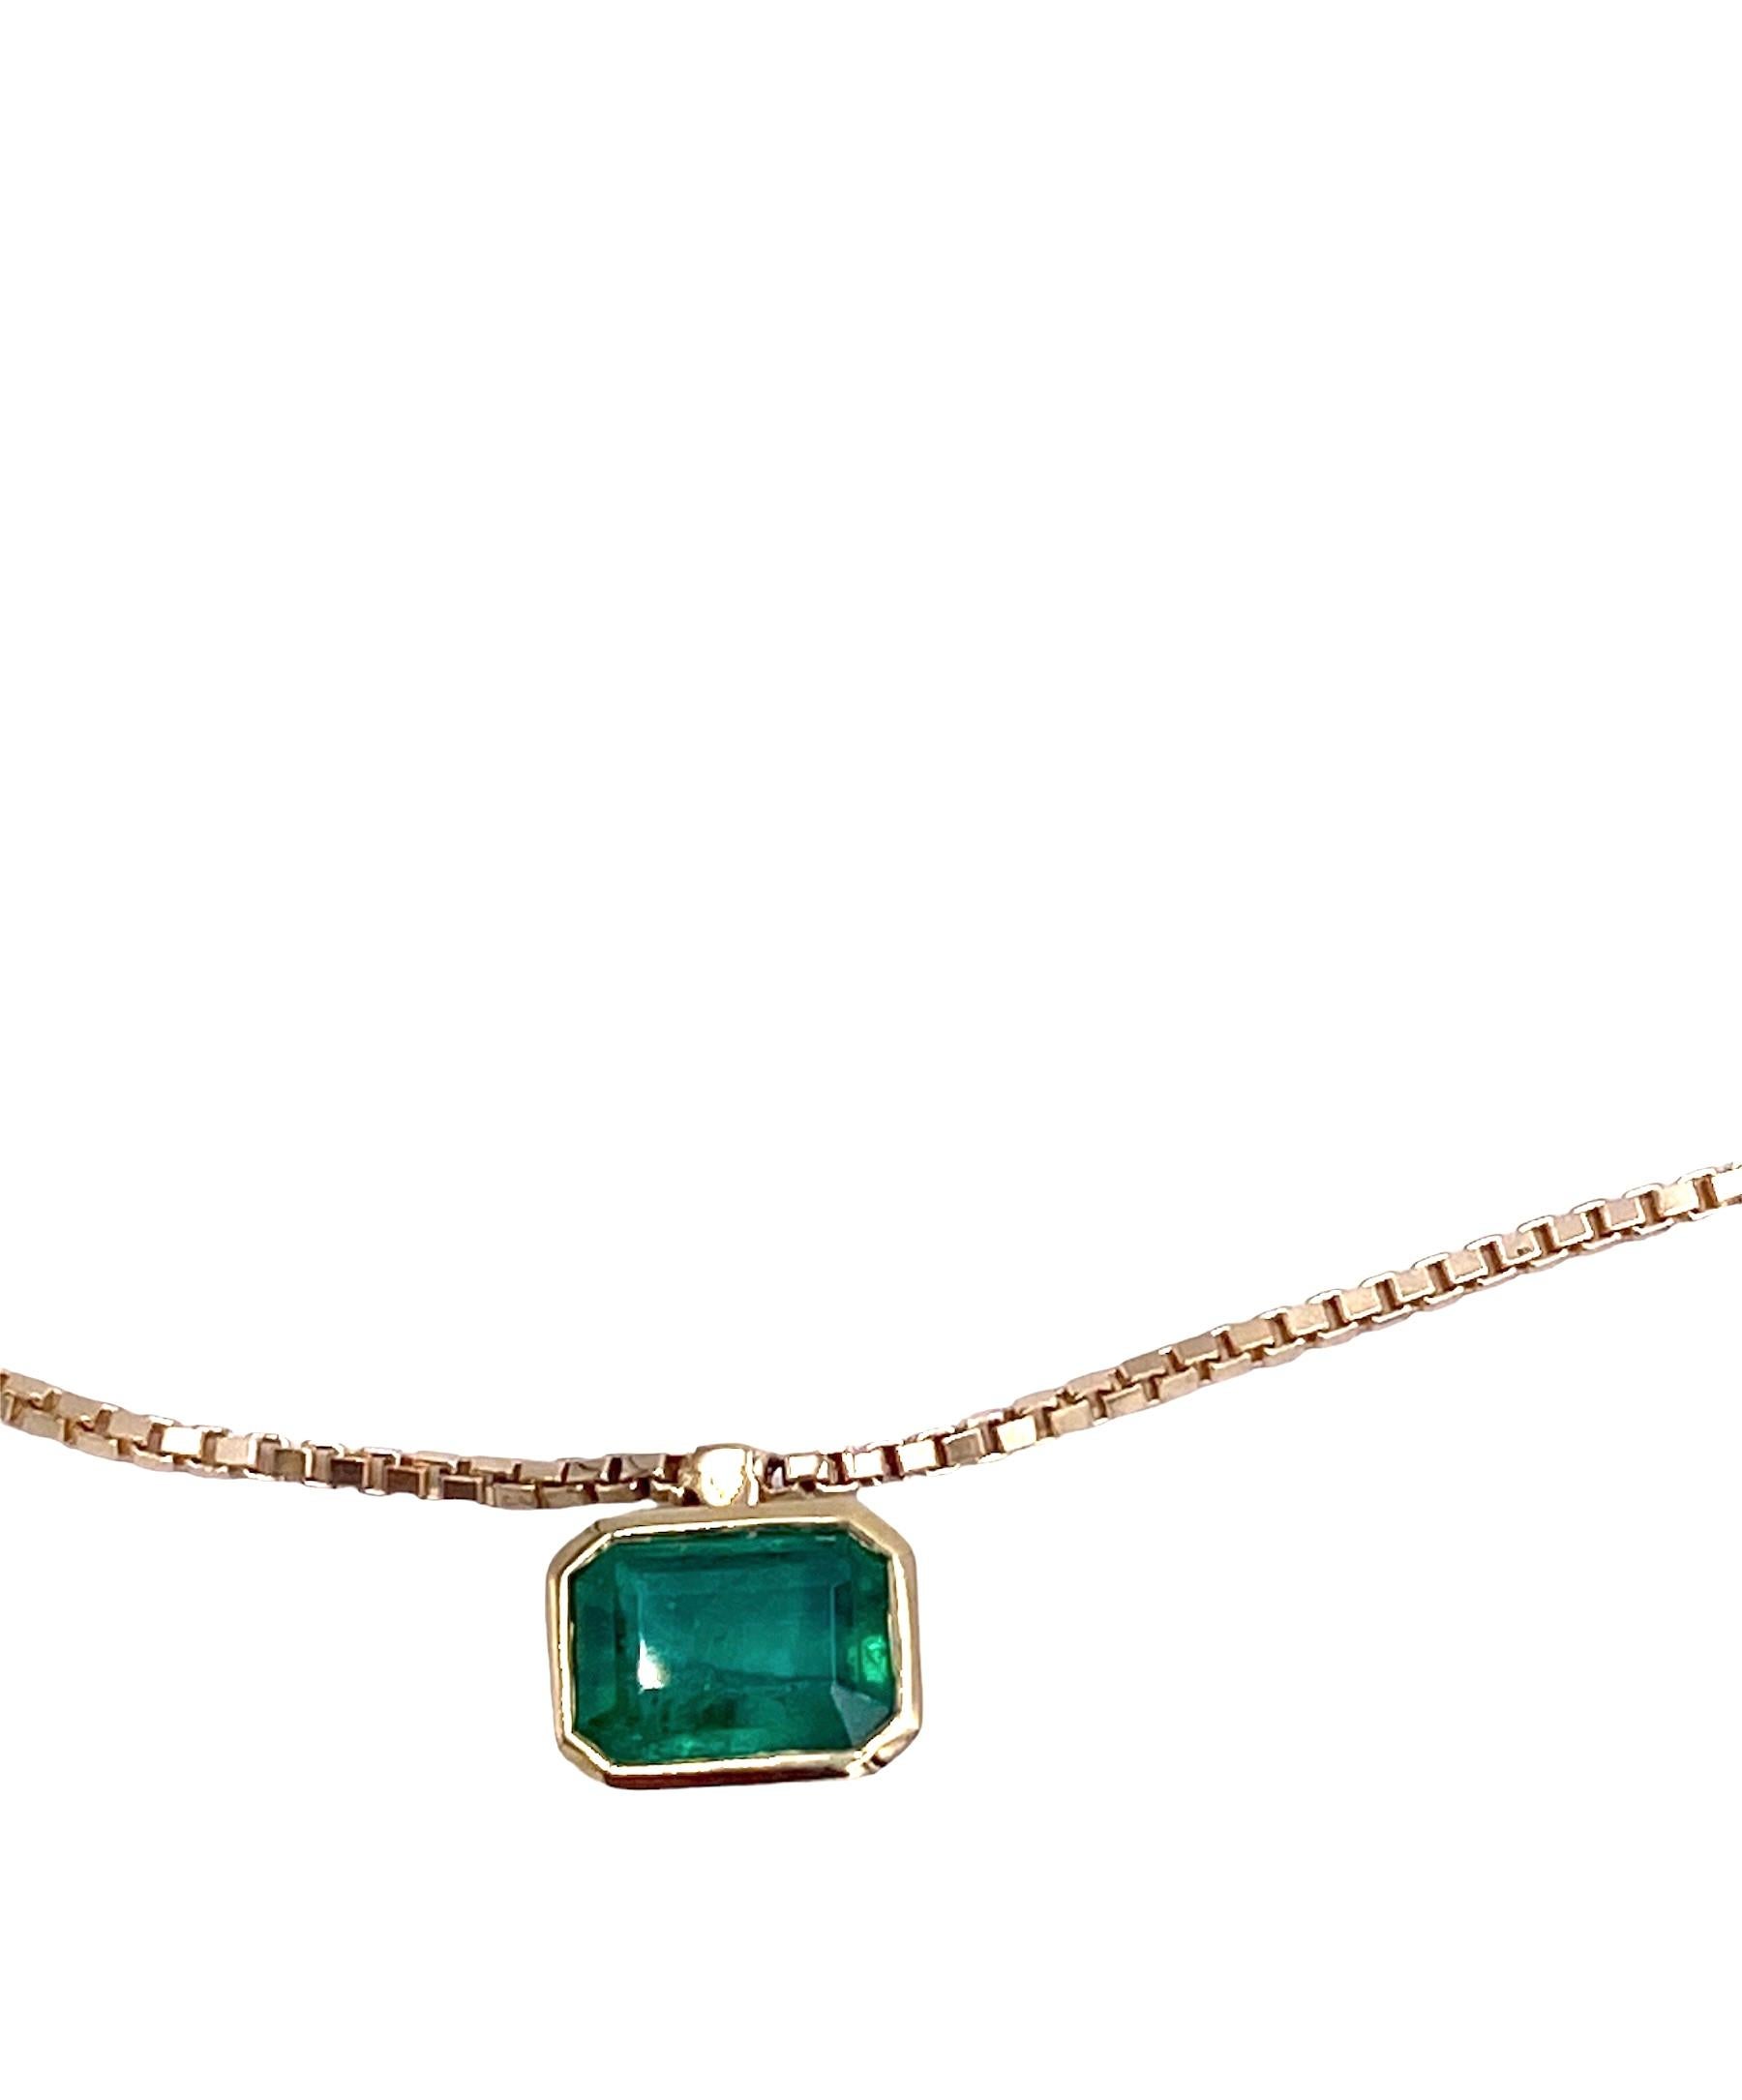 Emerald Cut Rossella Ugolini Modern Emerald Man Necklace Crafted in Italy 18K Yellow Gold For Sale